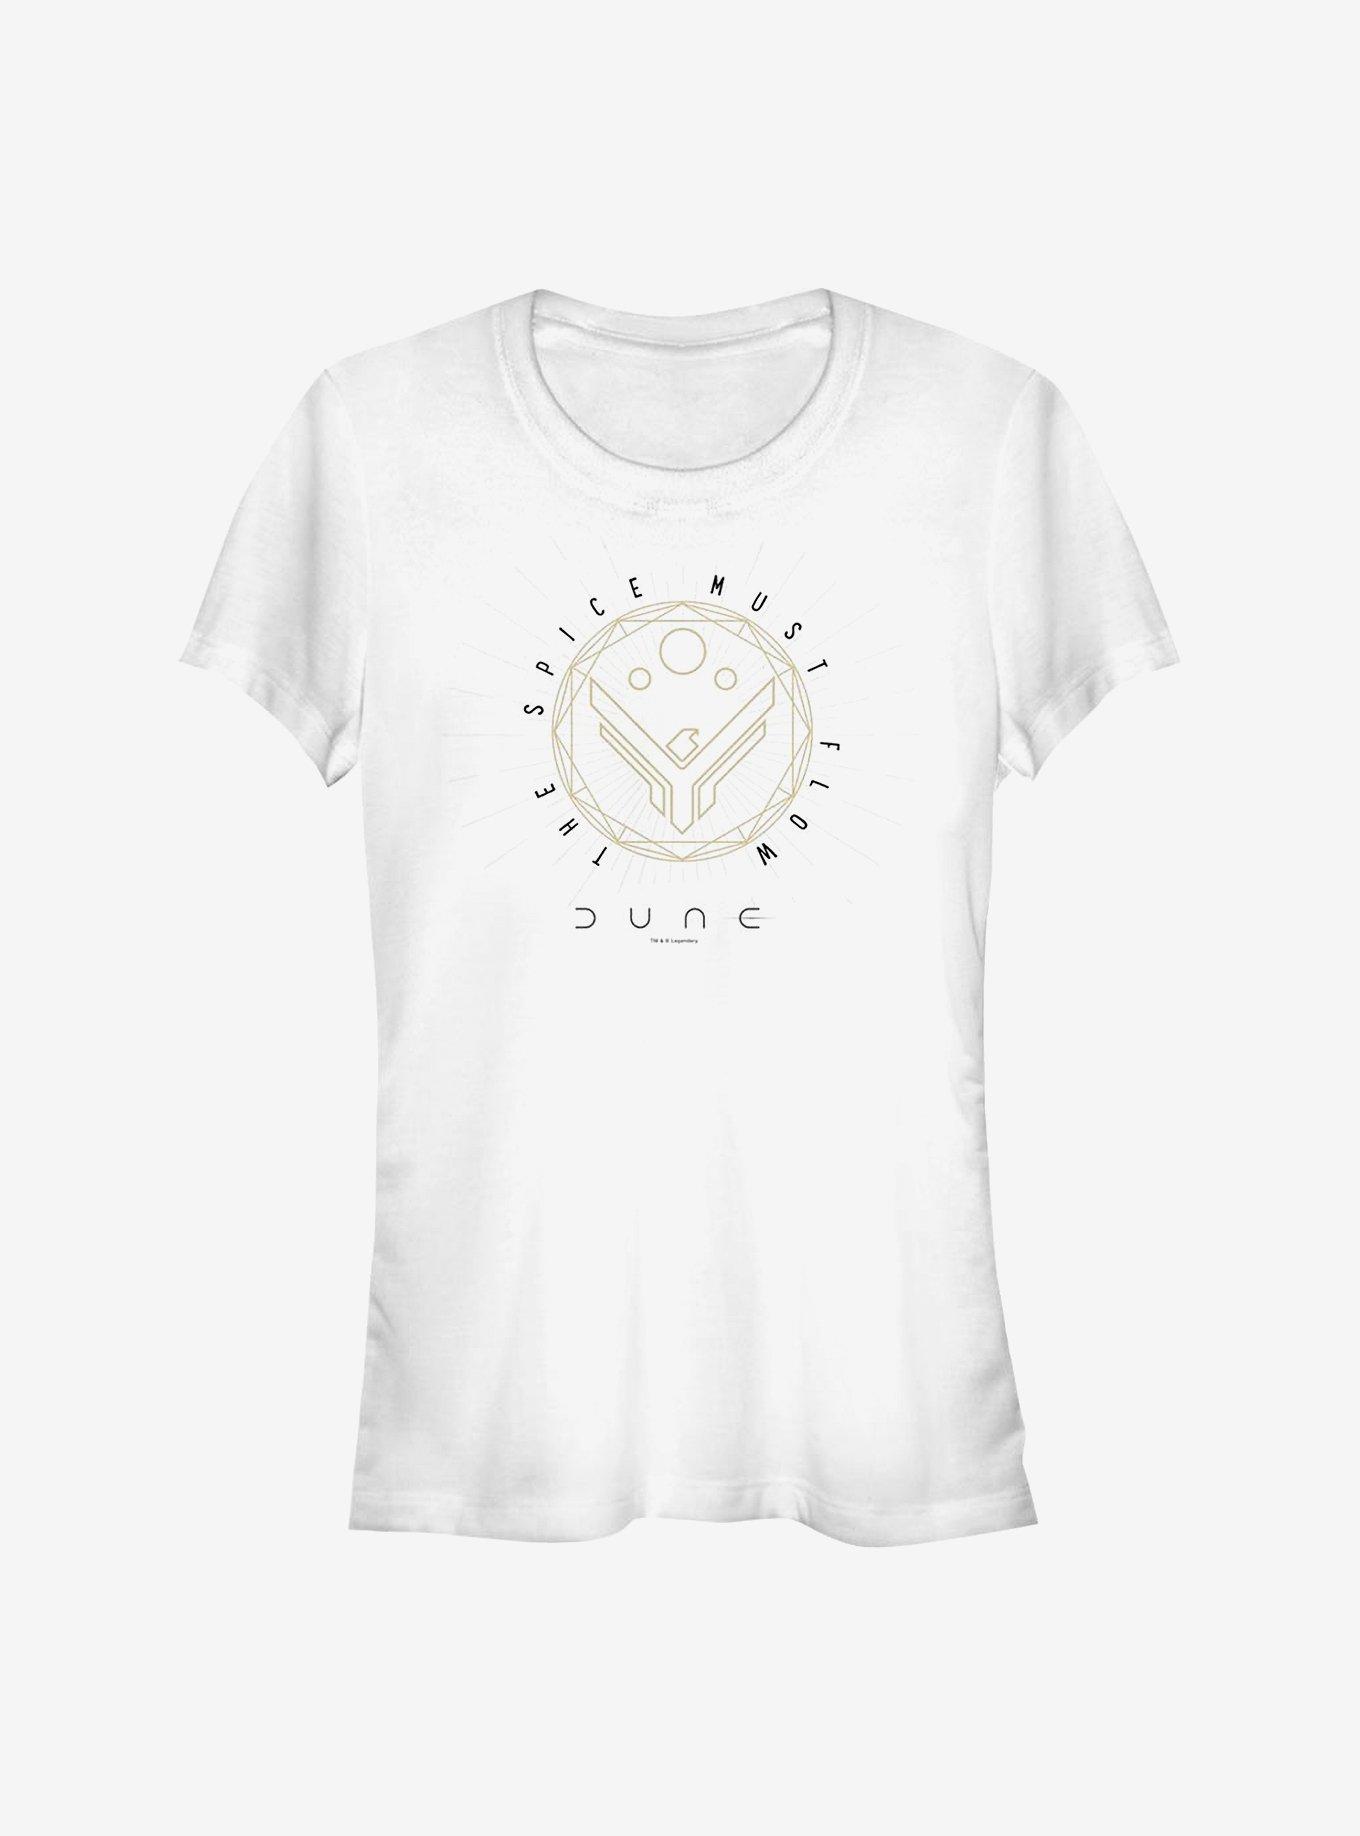 Dune The Spice Must Flow Girls T-Shirt, WHITE, hi-res